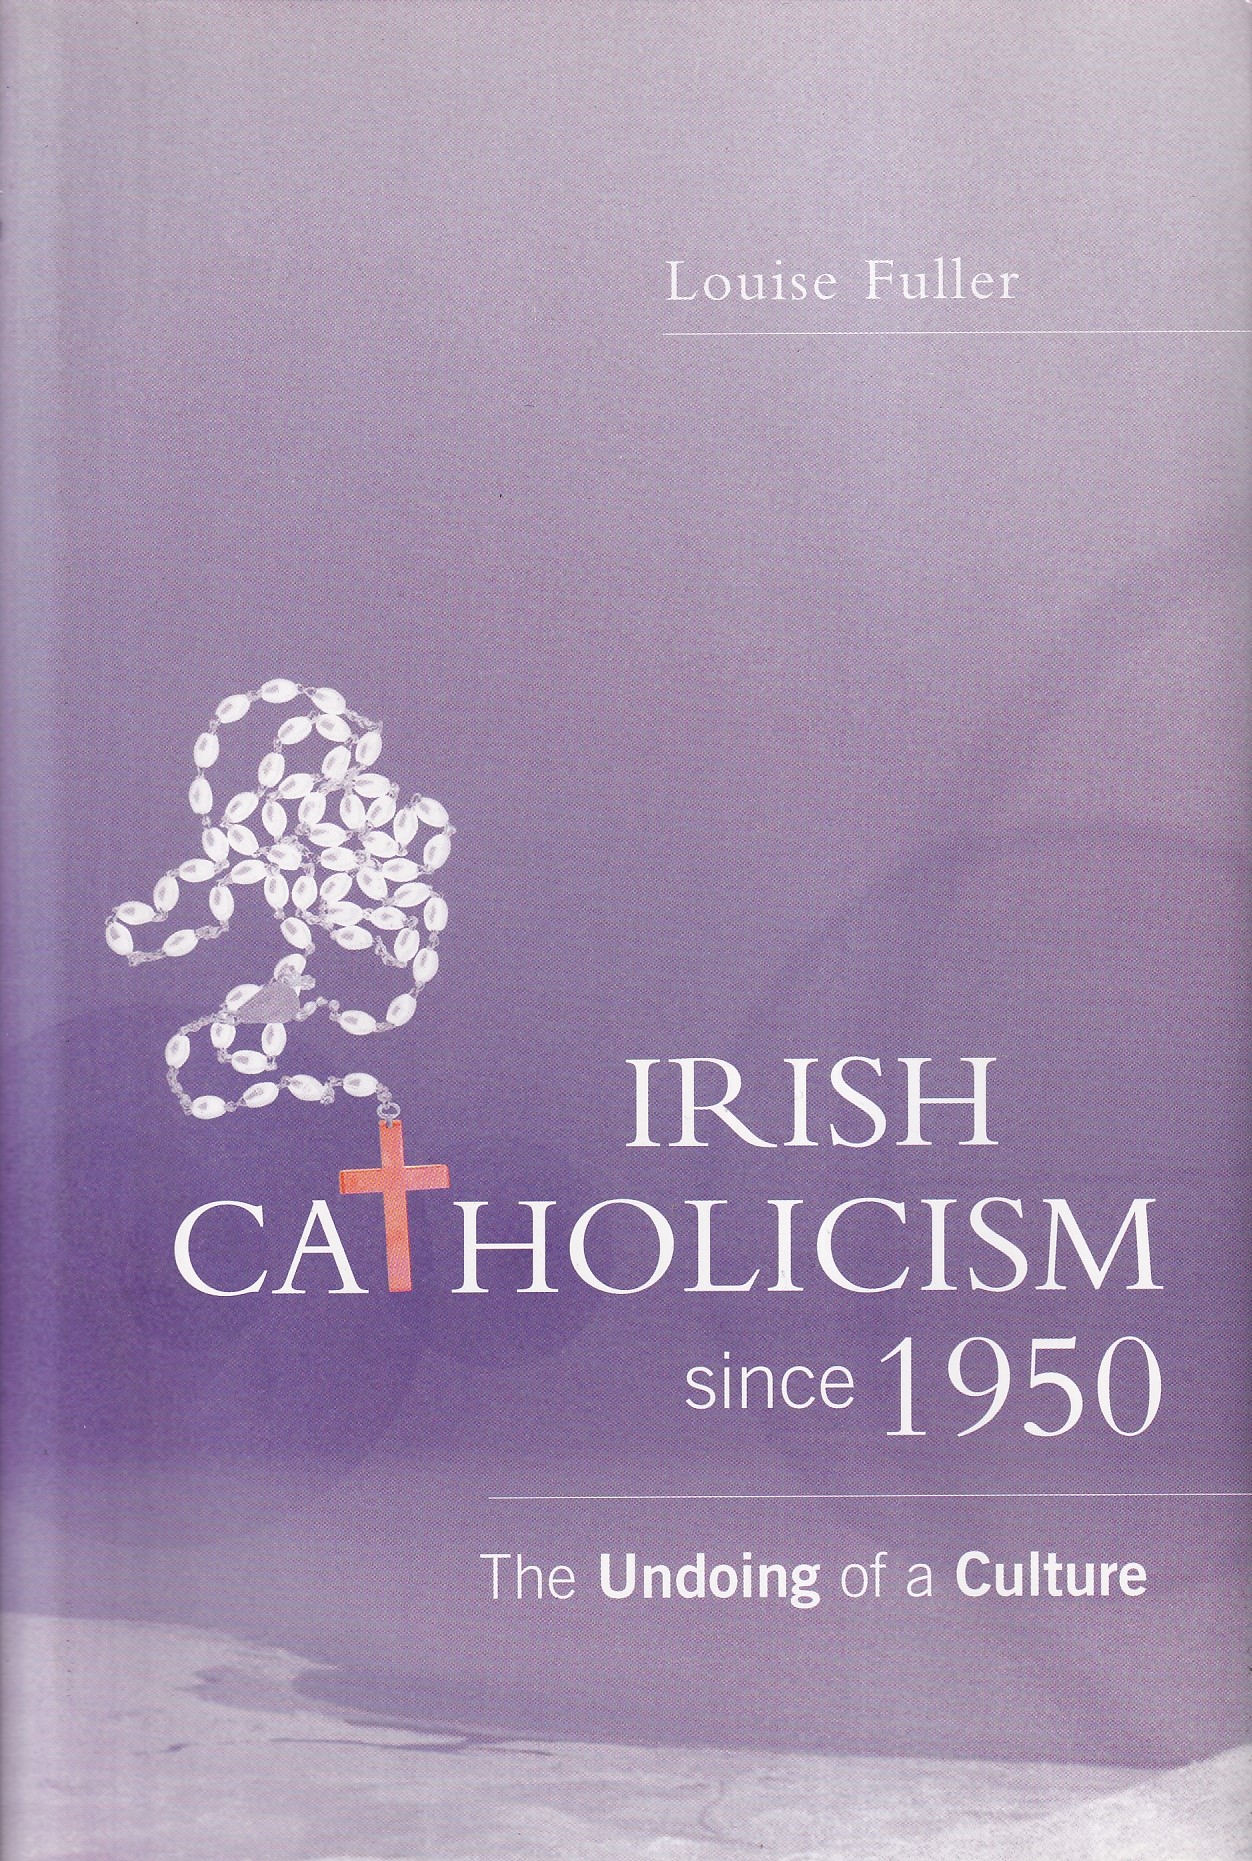 Irish Catholicism Since 1950: The Undoing of a Culture by Louise Fuller